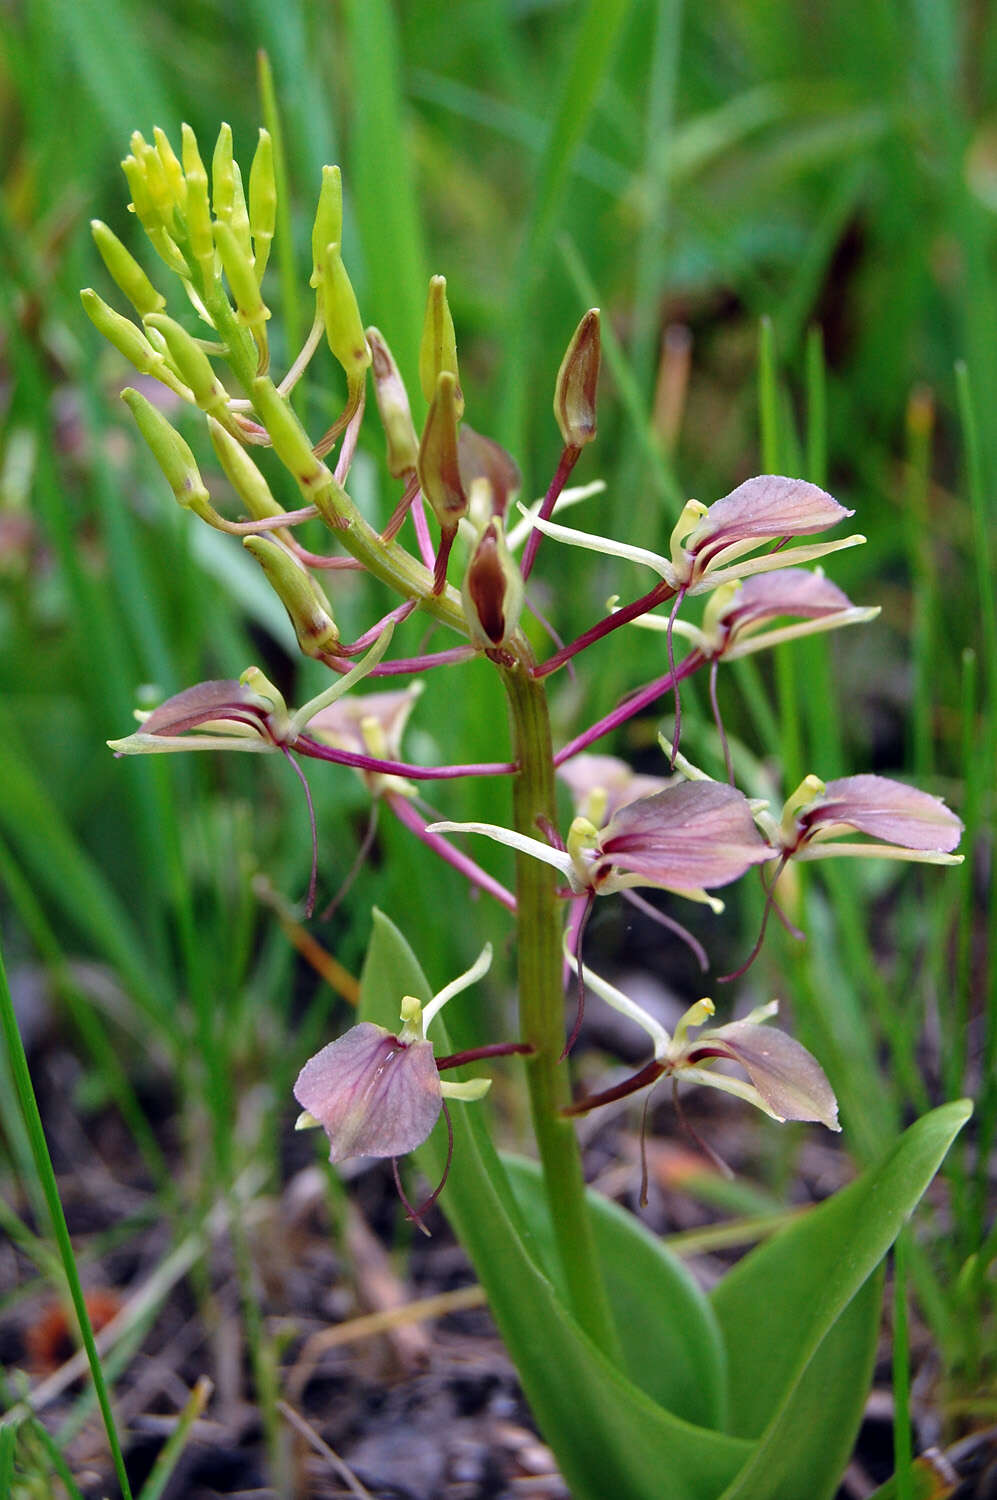 Image of Widelip orchid